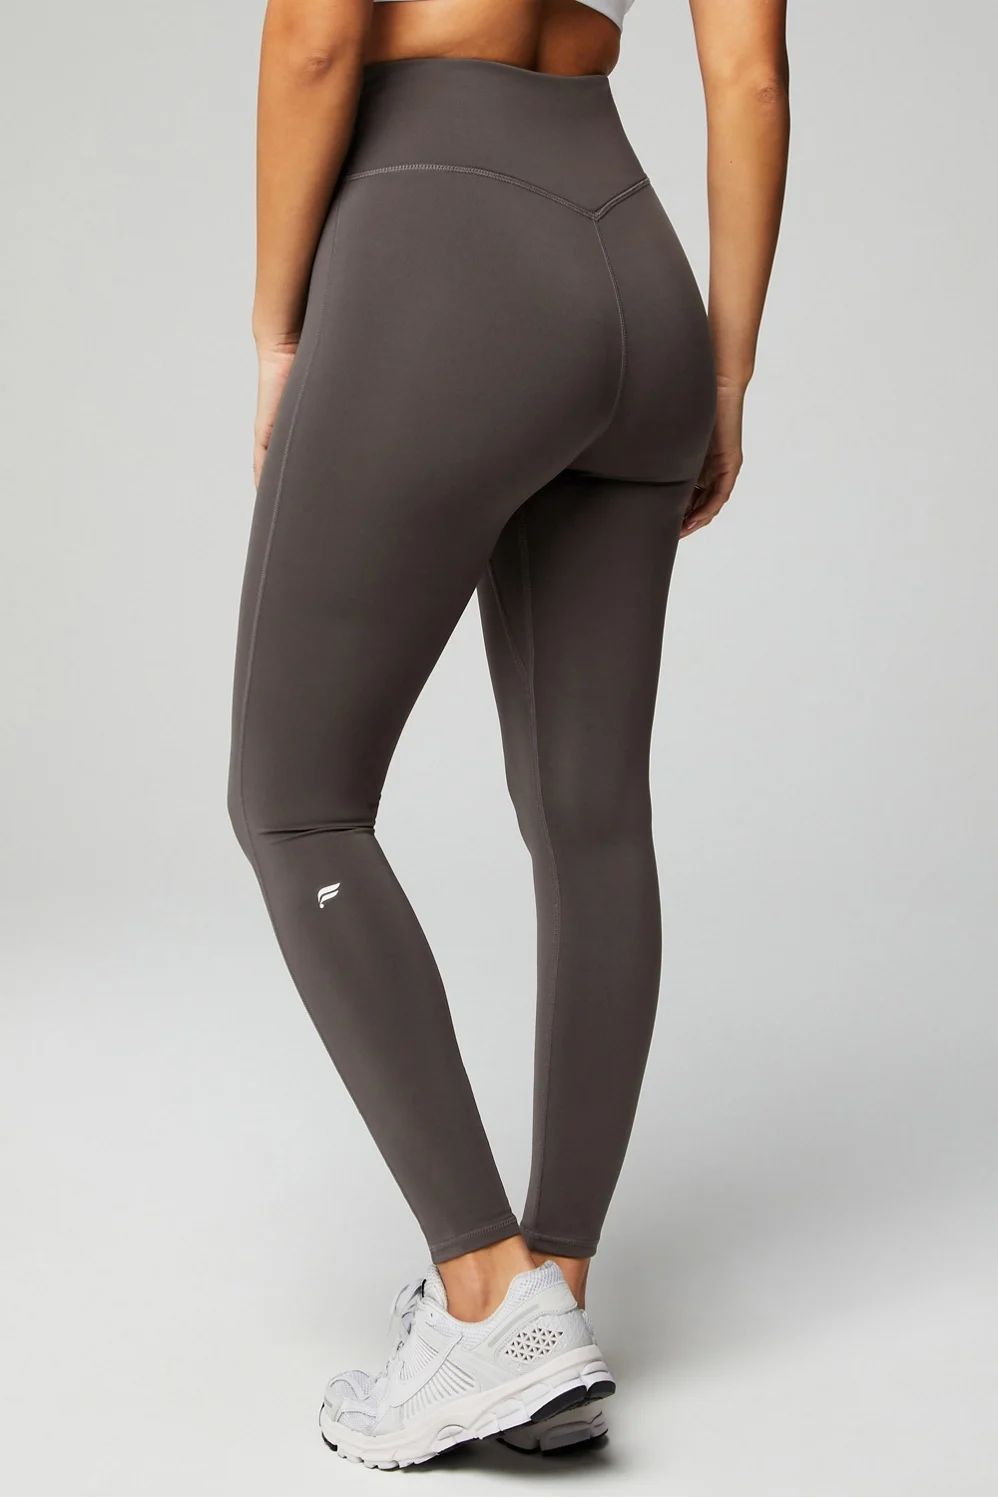 Anywhere Motion365+ High-Waisted Legging | Fabletics - North America